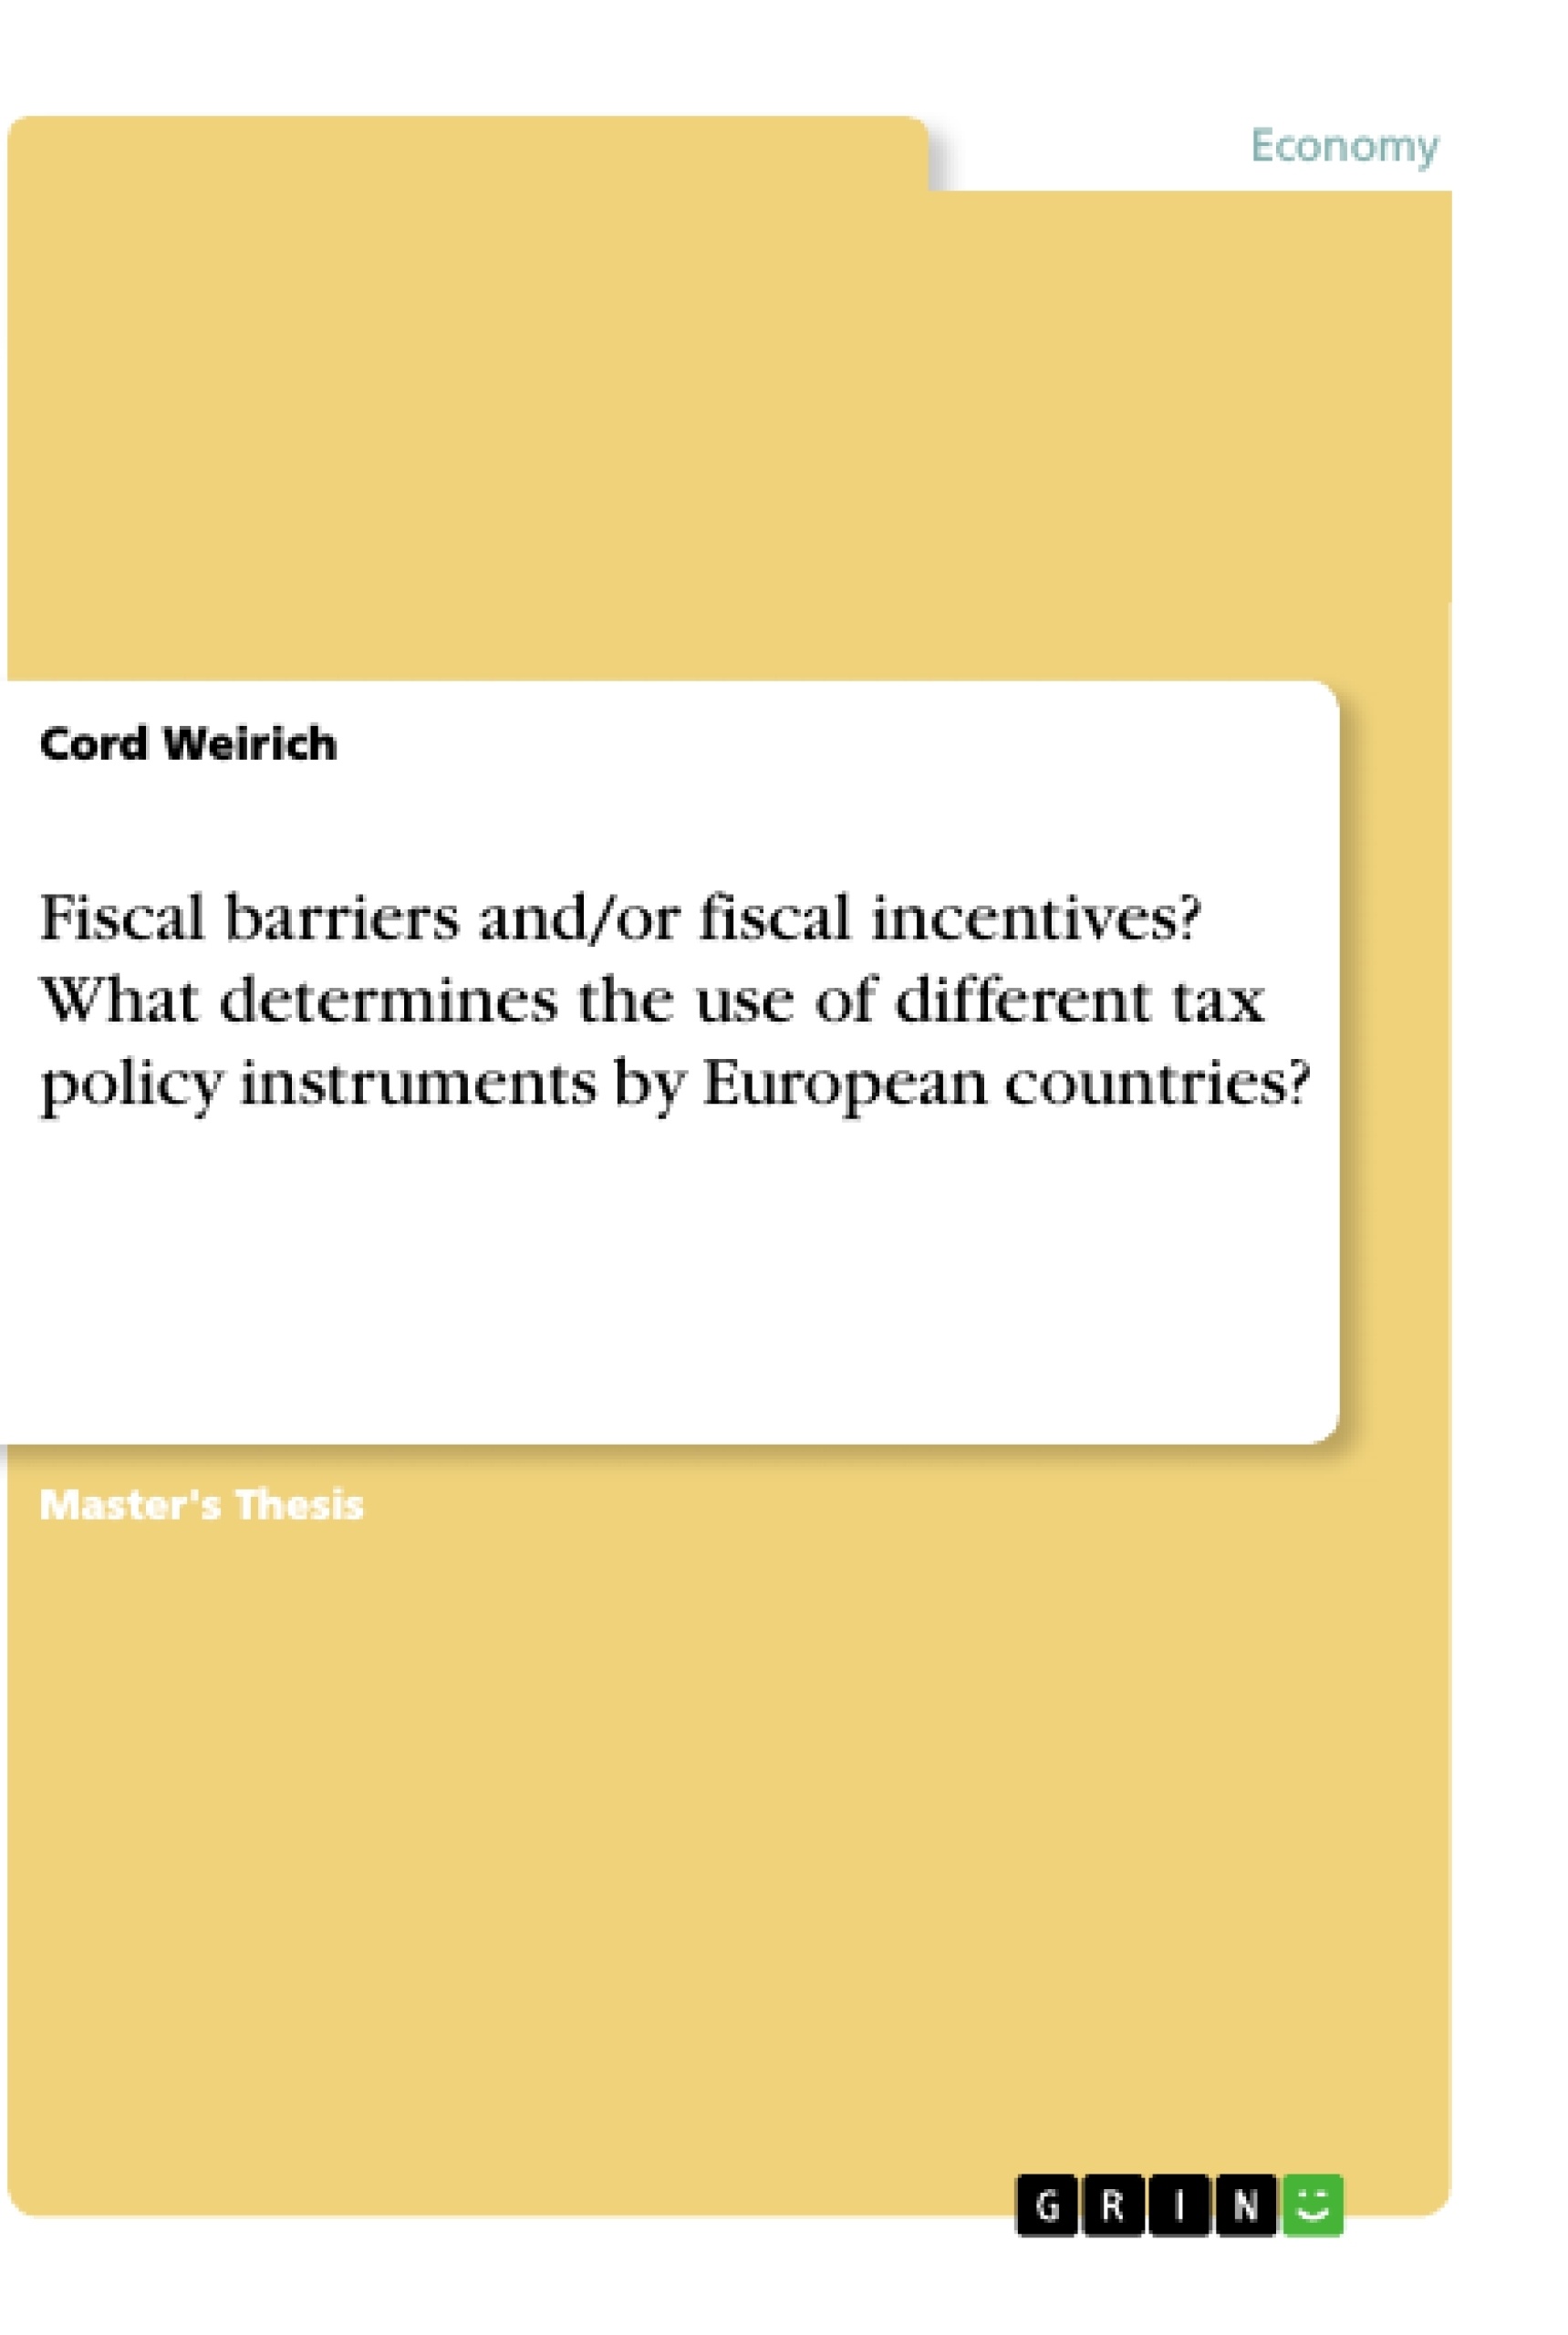 Title: Fiscal barriers and/or fiscal incentives? What determines the use of different tax policy instruments by European countries?